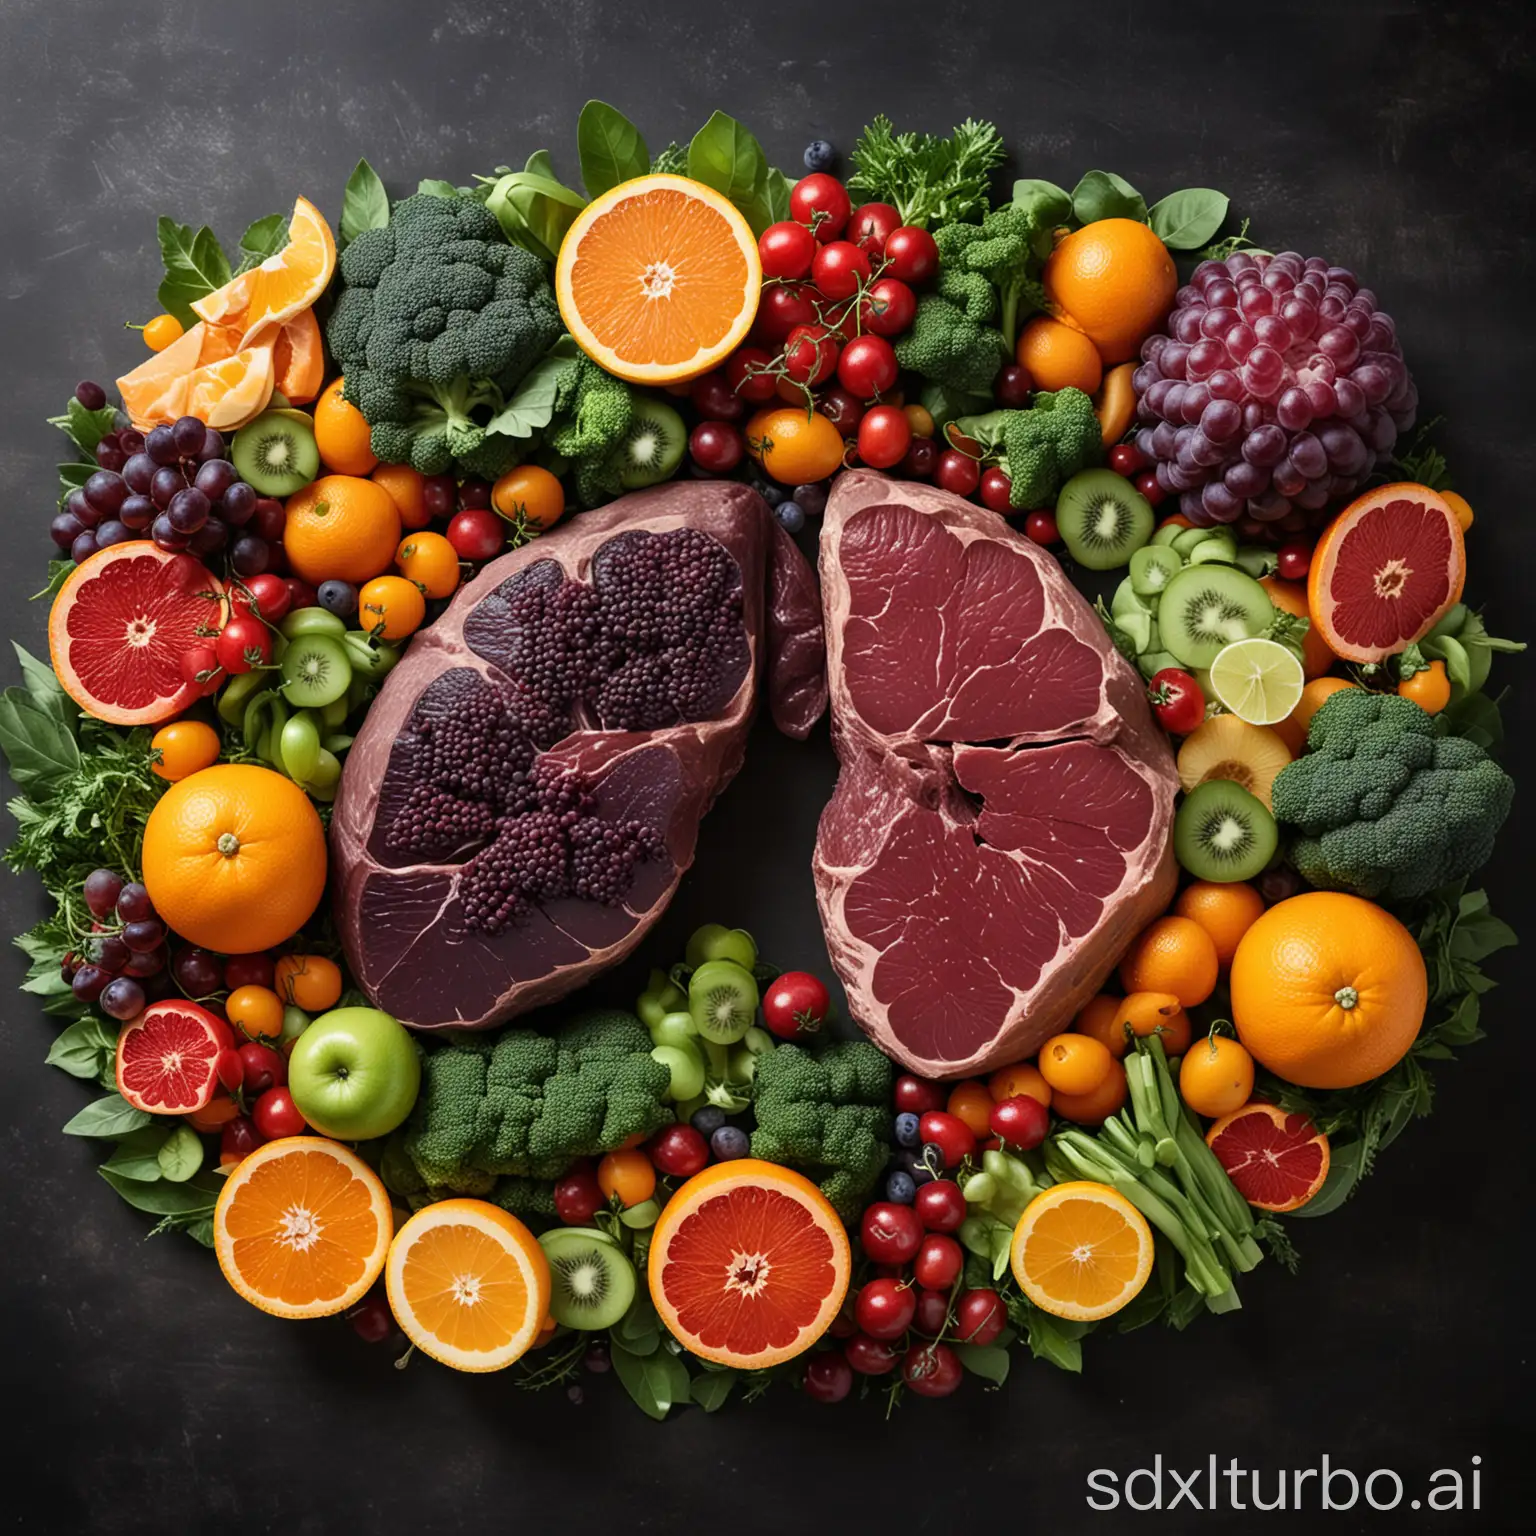 Image: An illustration of a vibrant, healthy liver surrounded by various fruits and vegetables representing detoxification.
Description: Picture a lush, green liver glowing with vitality, embraced by an assortment of colorful fruits and vegetables symbolizing the detoxifying power of glutathione. Radiant oranges, deep purples, and verdant greens showcase the diverse array of nutrients that support detoxification and immune function. Caption: "Nourish your body with glutathione for a vibrant liver and fortified immune system. #Detox #ImmuneBoost"